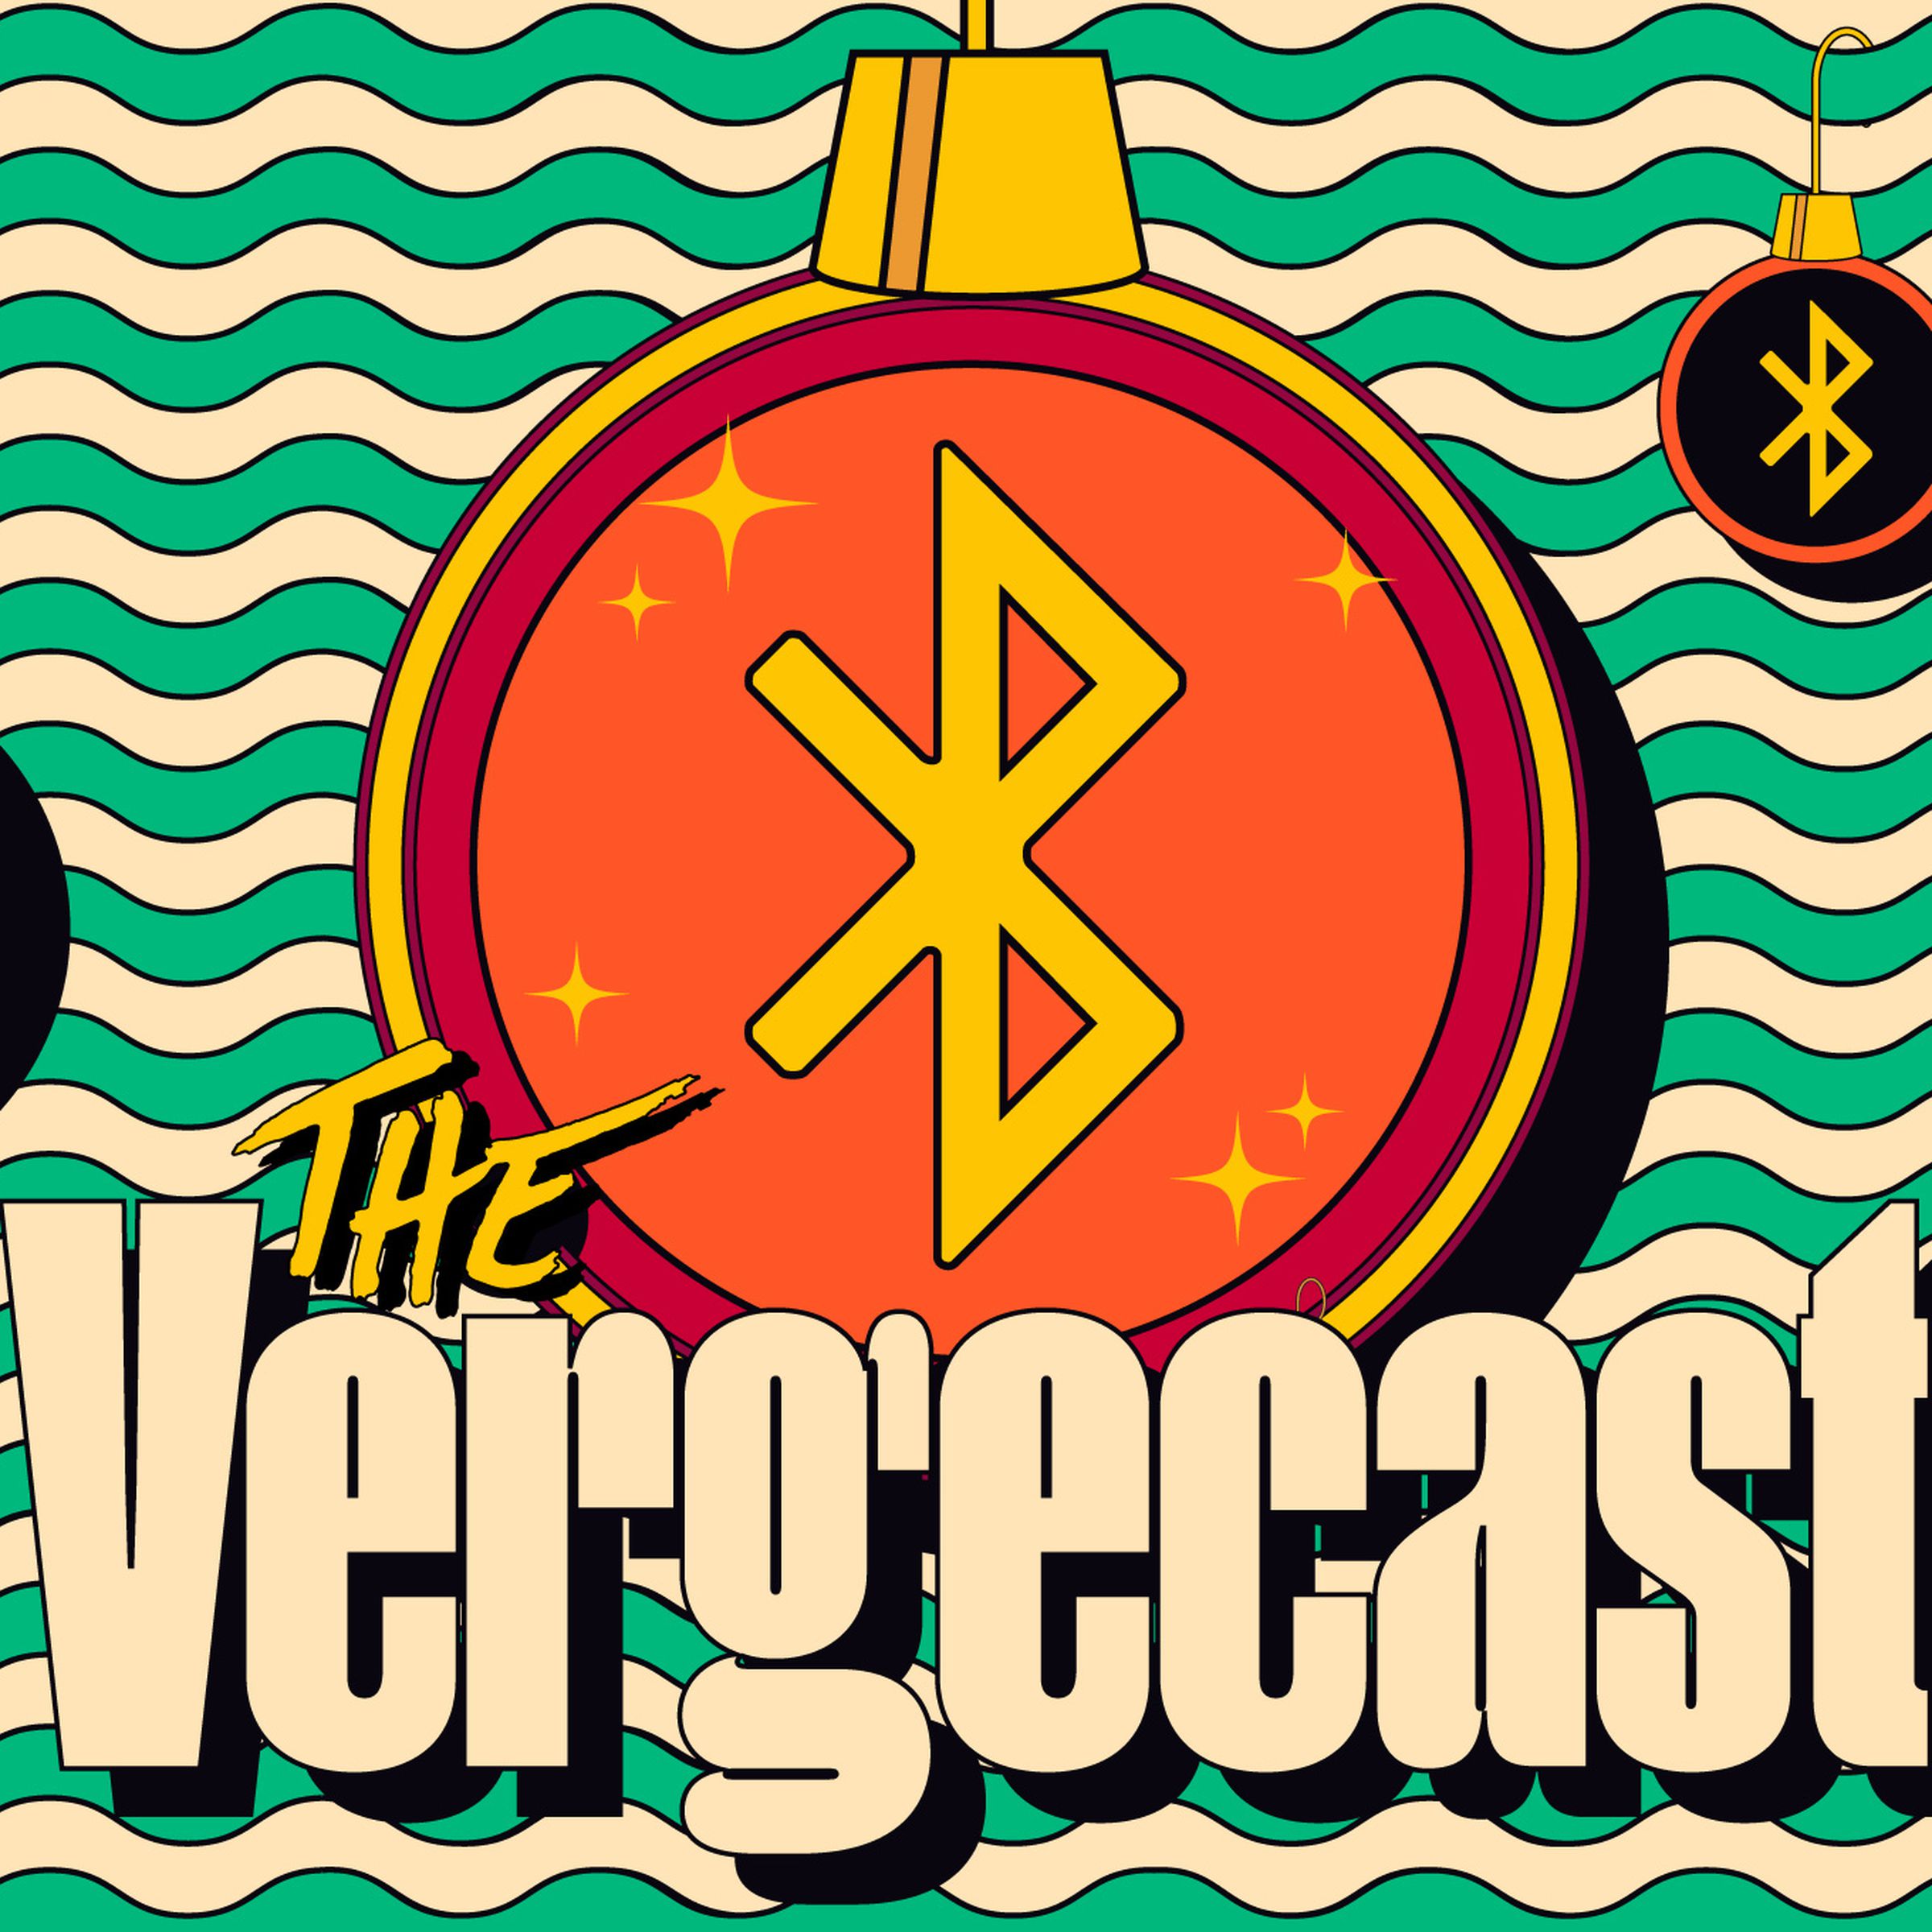 Tree ornaments featuring the Bluetooth logo behind the Vergecast logo. 